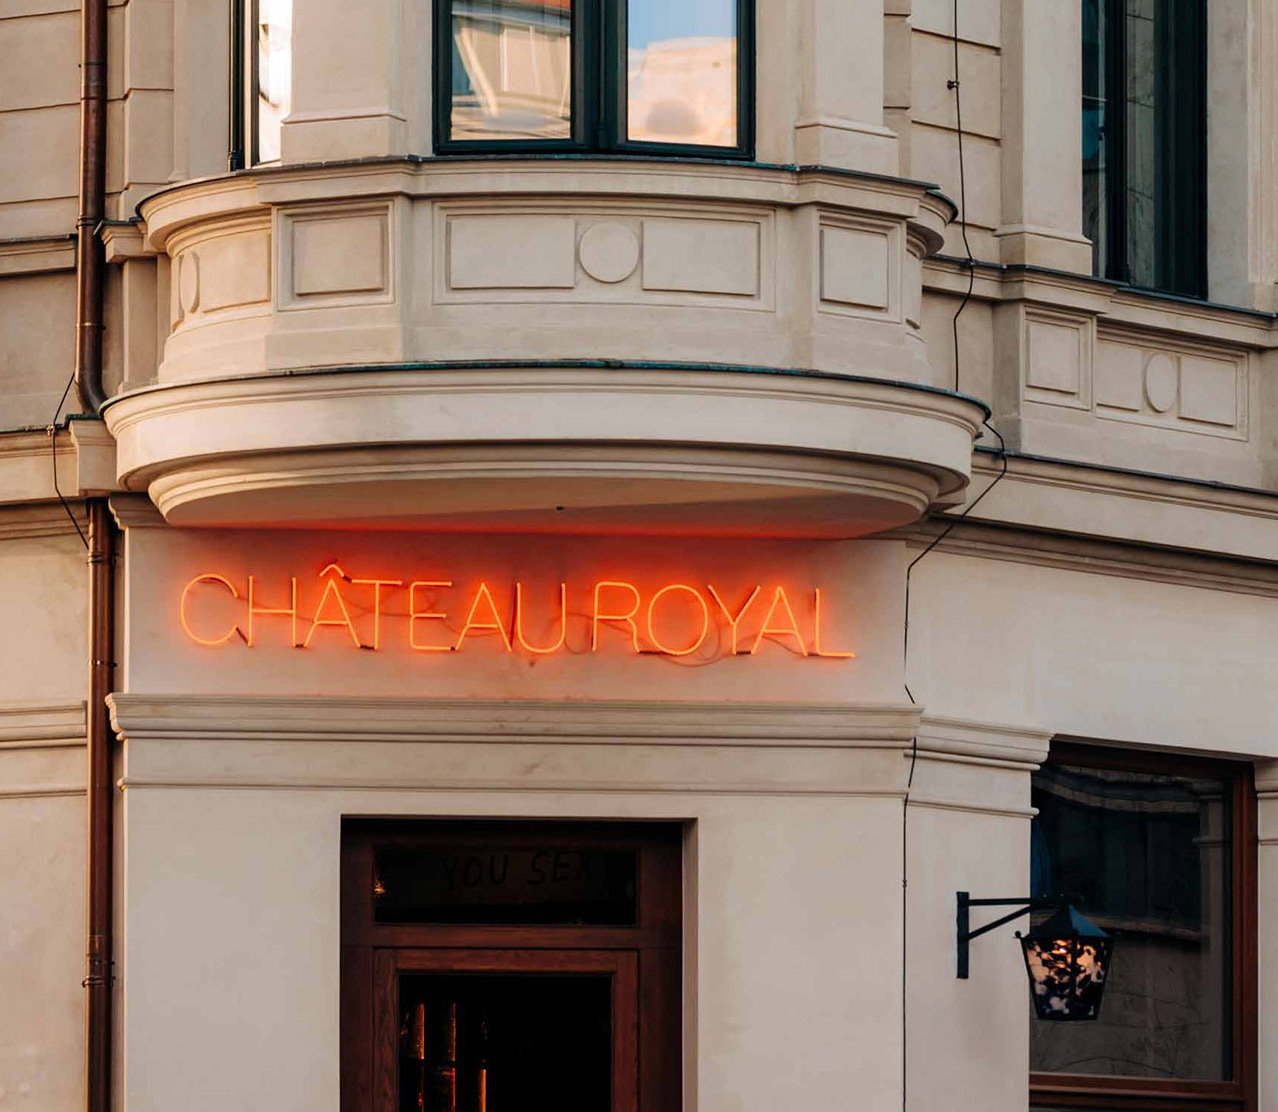 Château Royal Is A Berliners’ Love Letter To The World